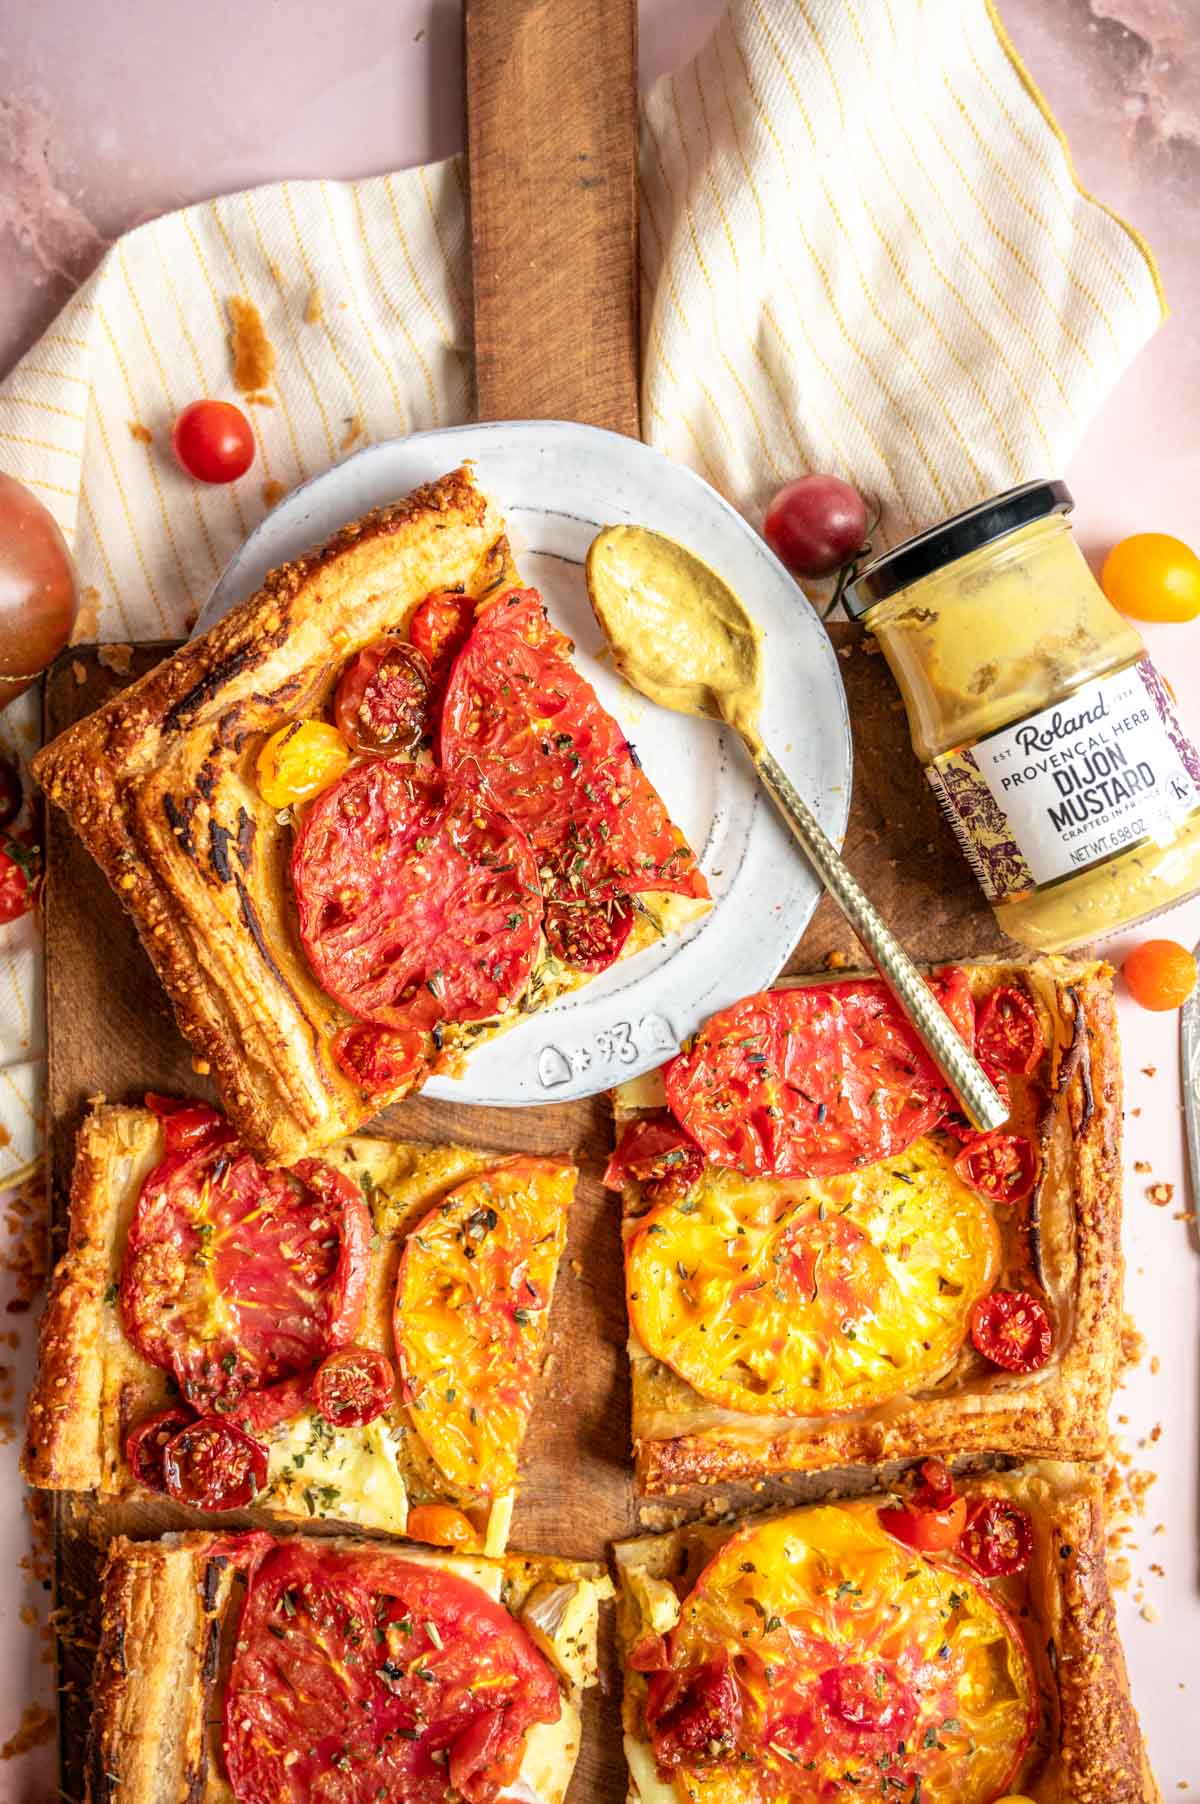 A sliced tomato tart on a wood cutting board with one grey dessert plate with a slice sitting on top. A jar of Roland Foods Mustard is off to the side.